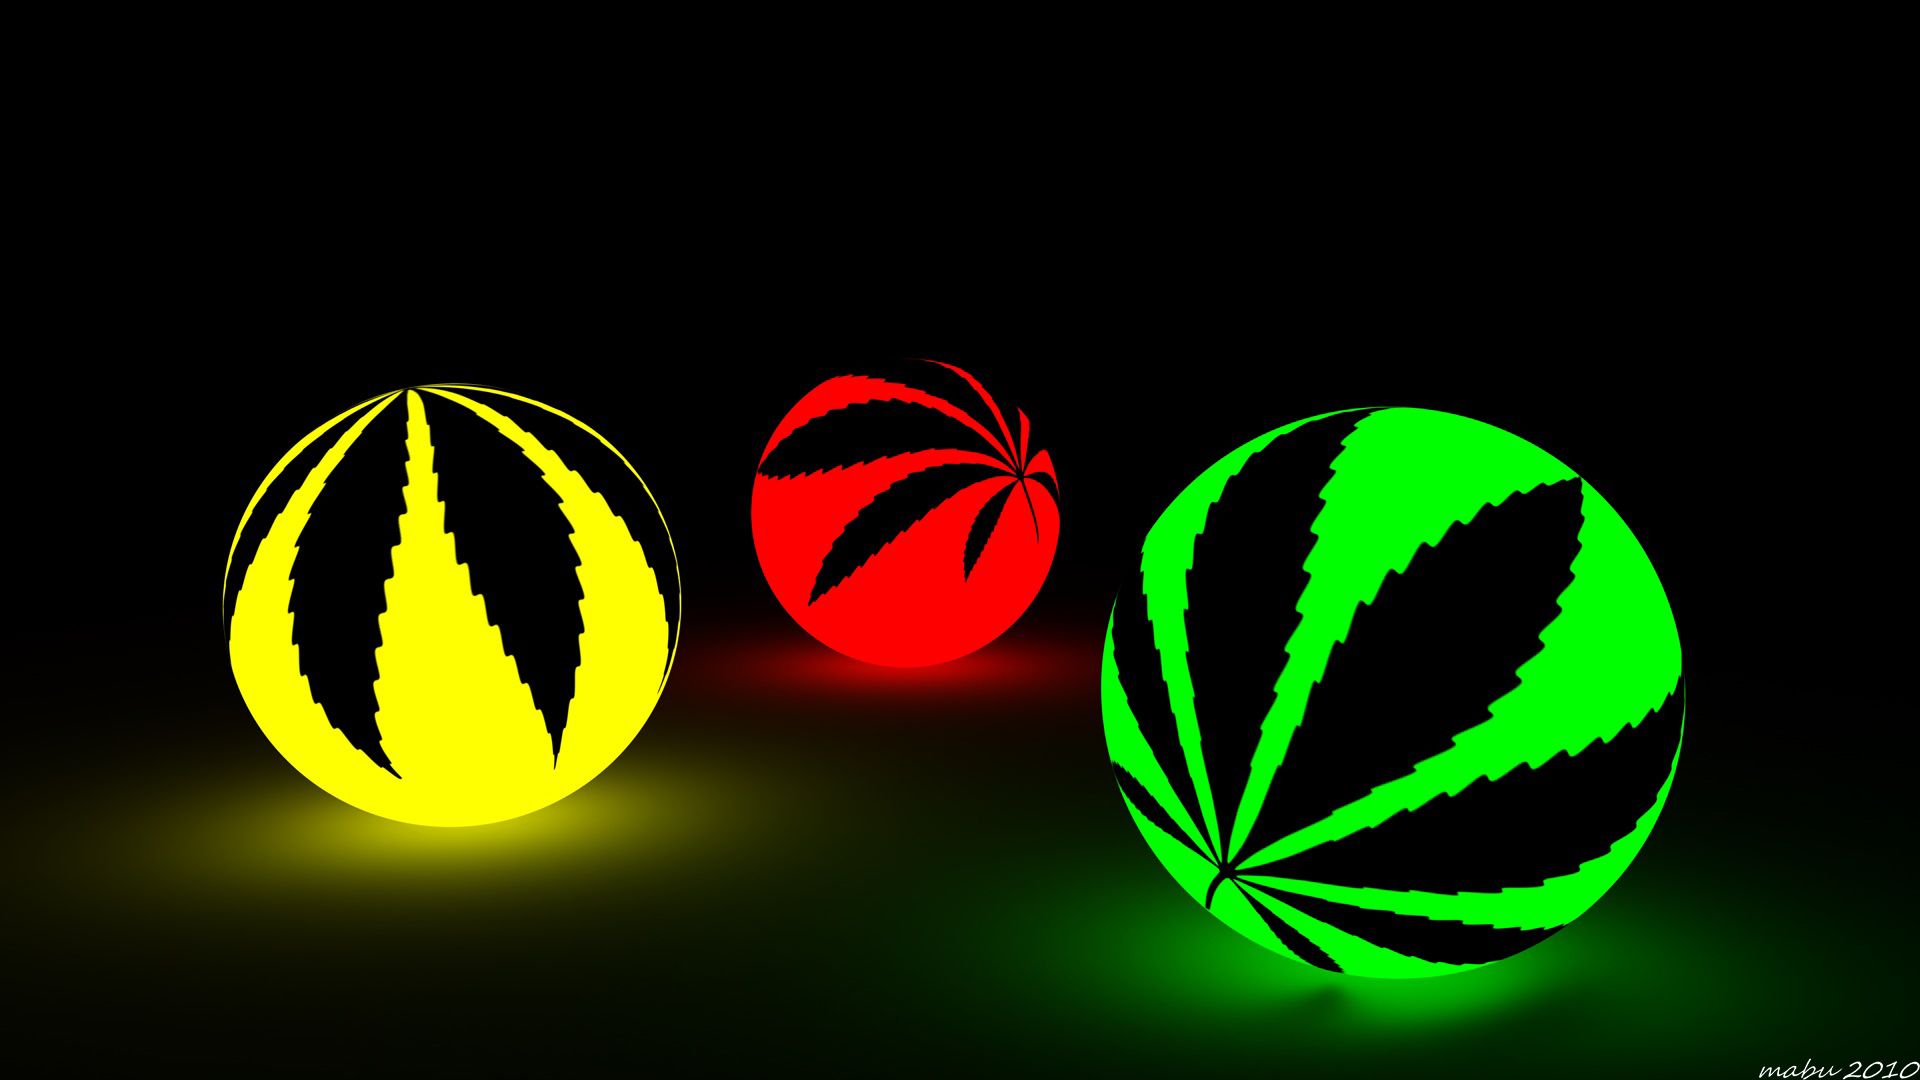 Trippy Weed Wallpaper | Wallpapers, Backgrounds, Images, Art Photos.